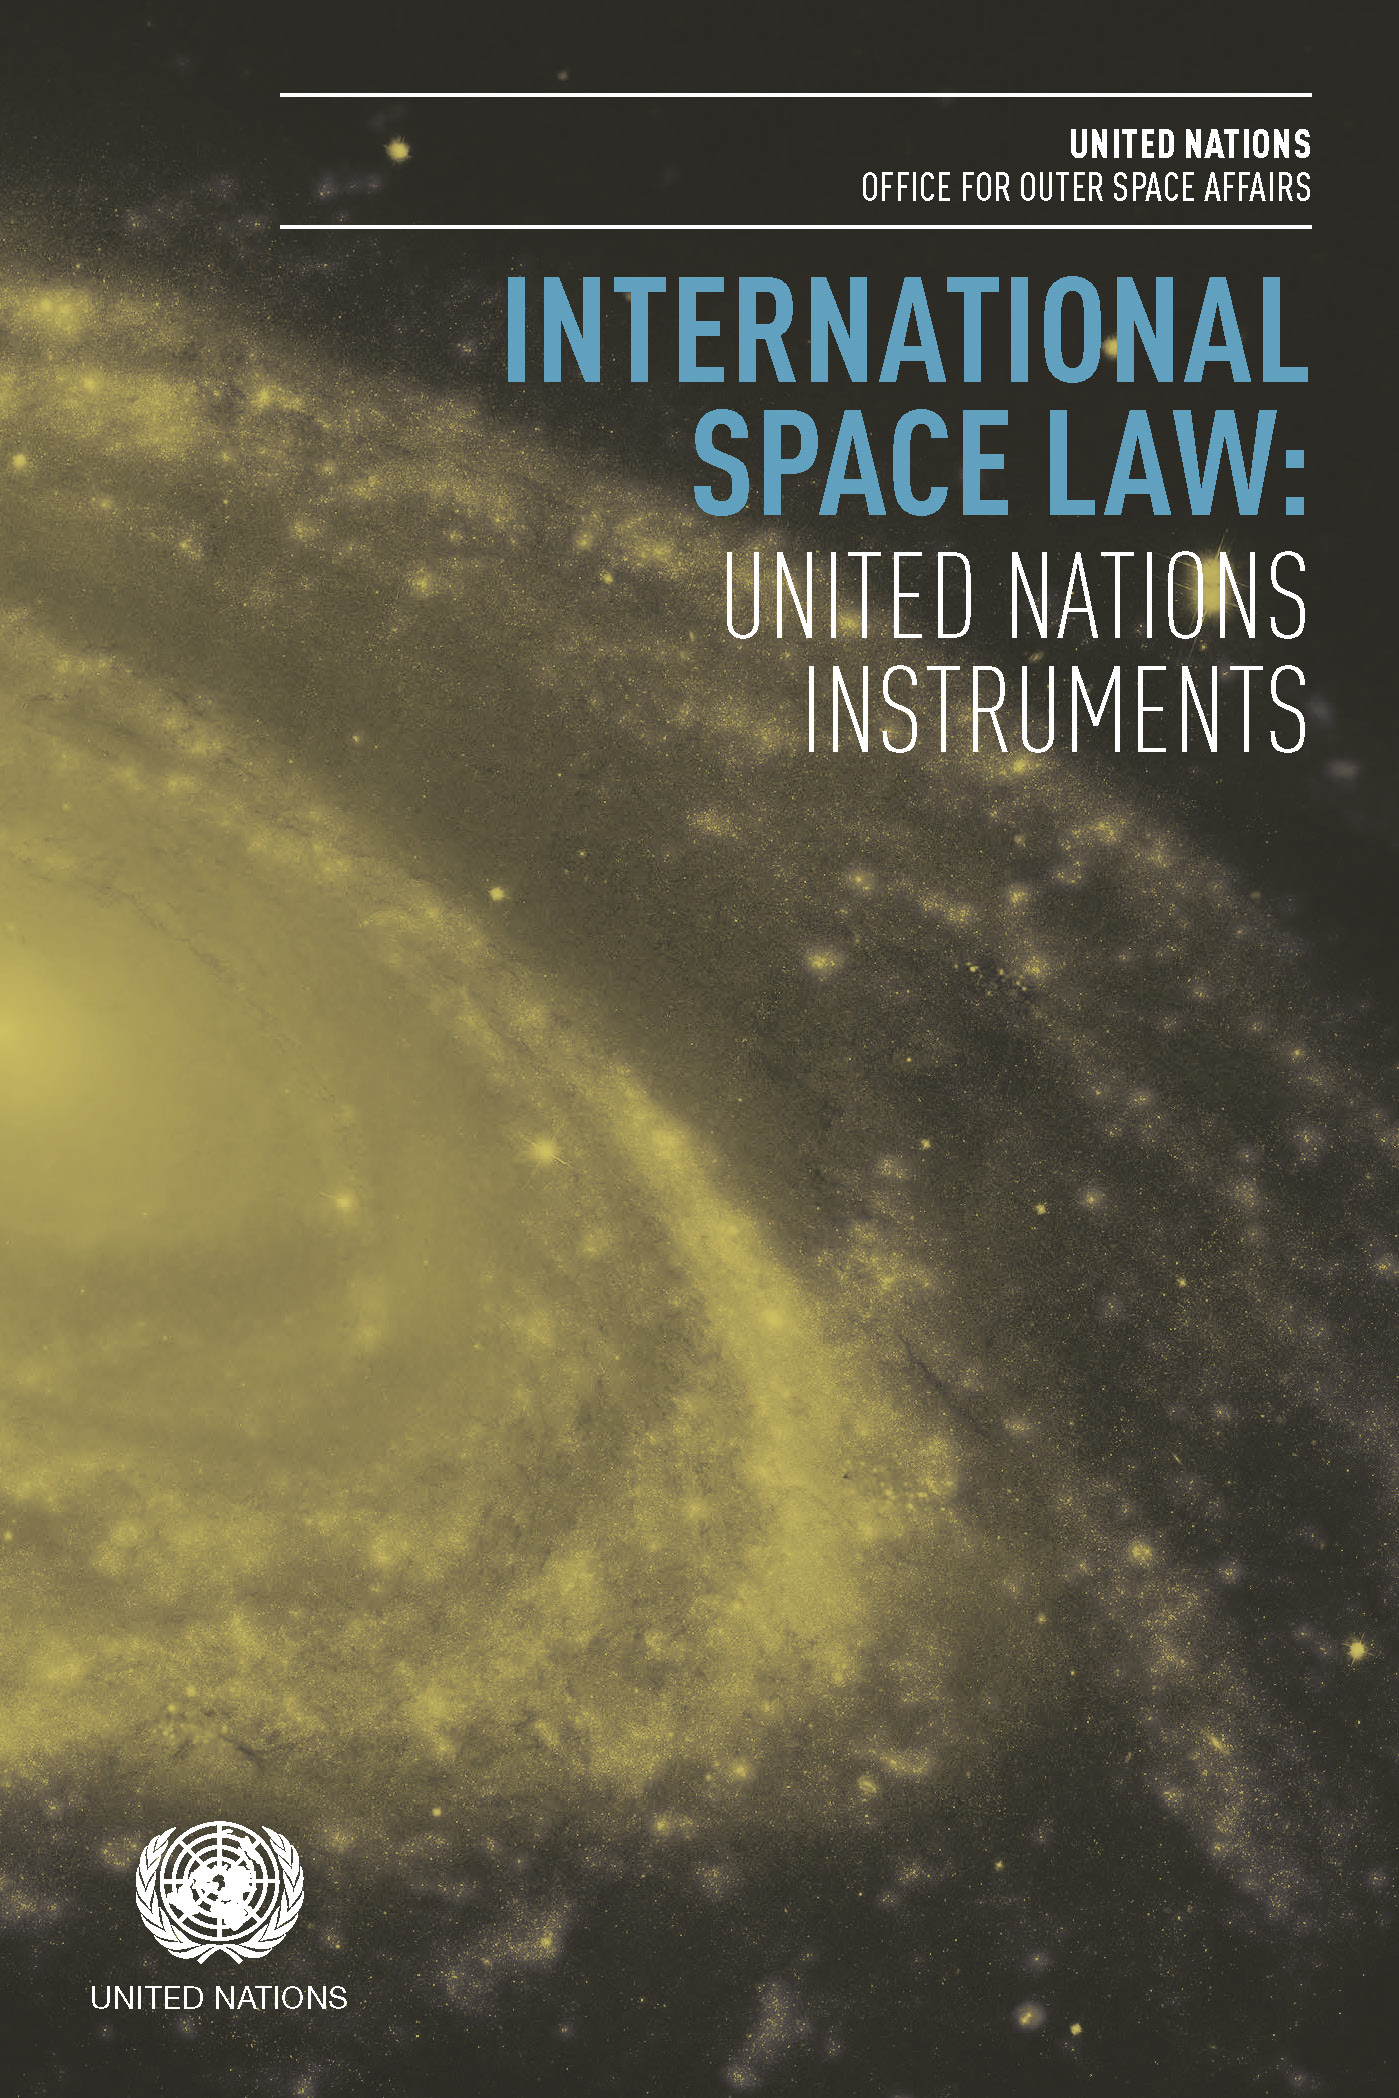 Space Law Treaties and Principles